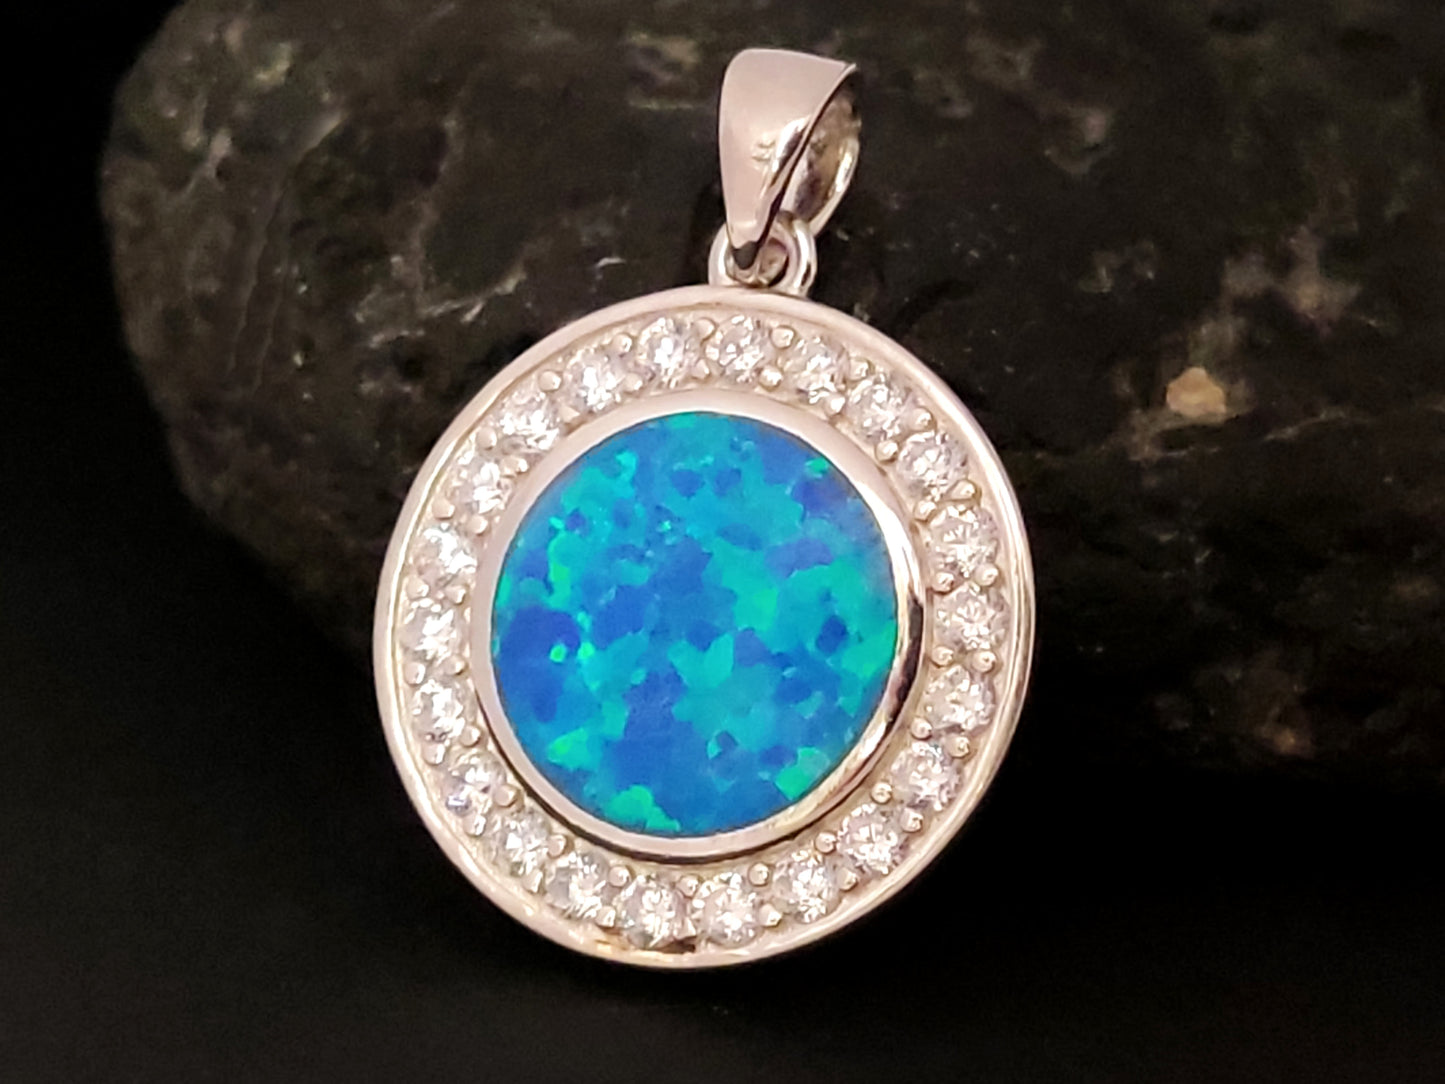 Silver pendant from Greece in round shape with blue opal and transparent crystals.